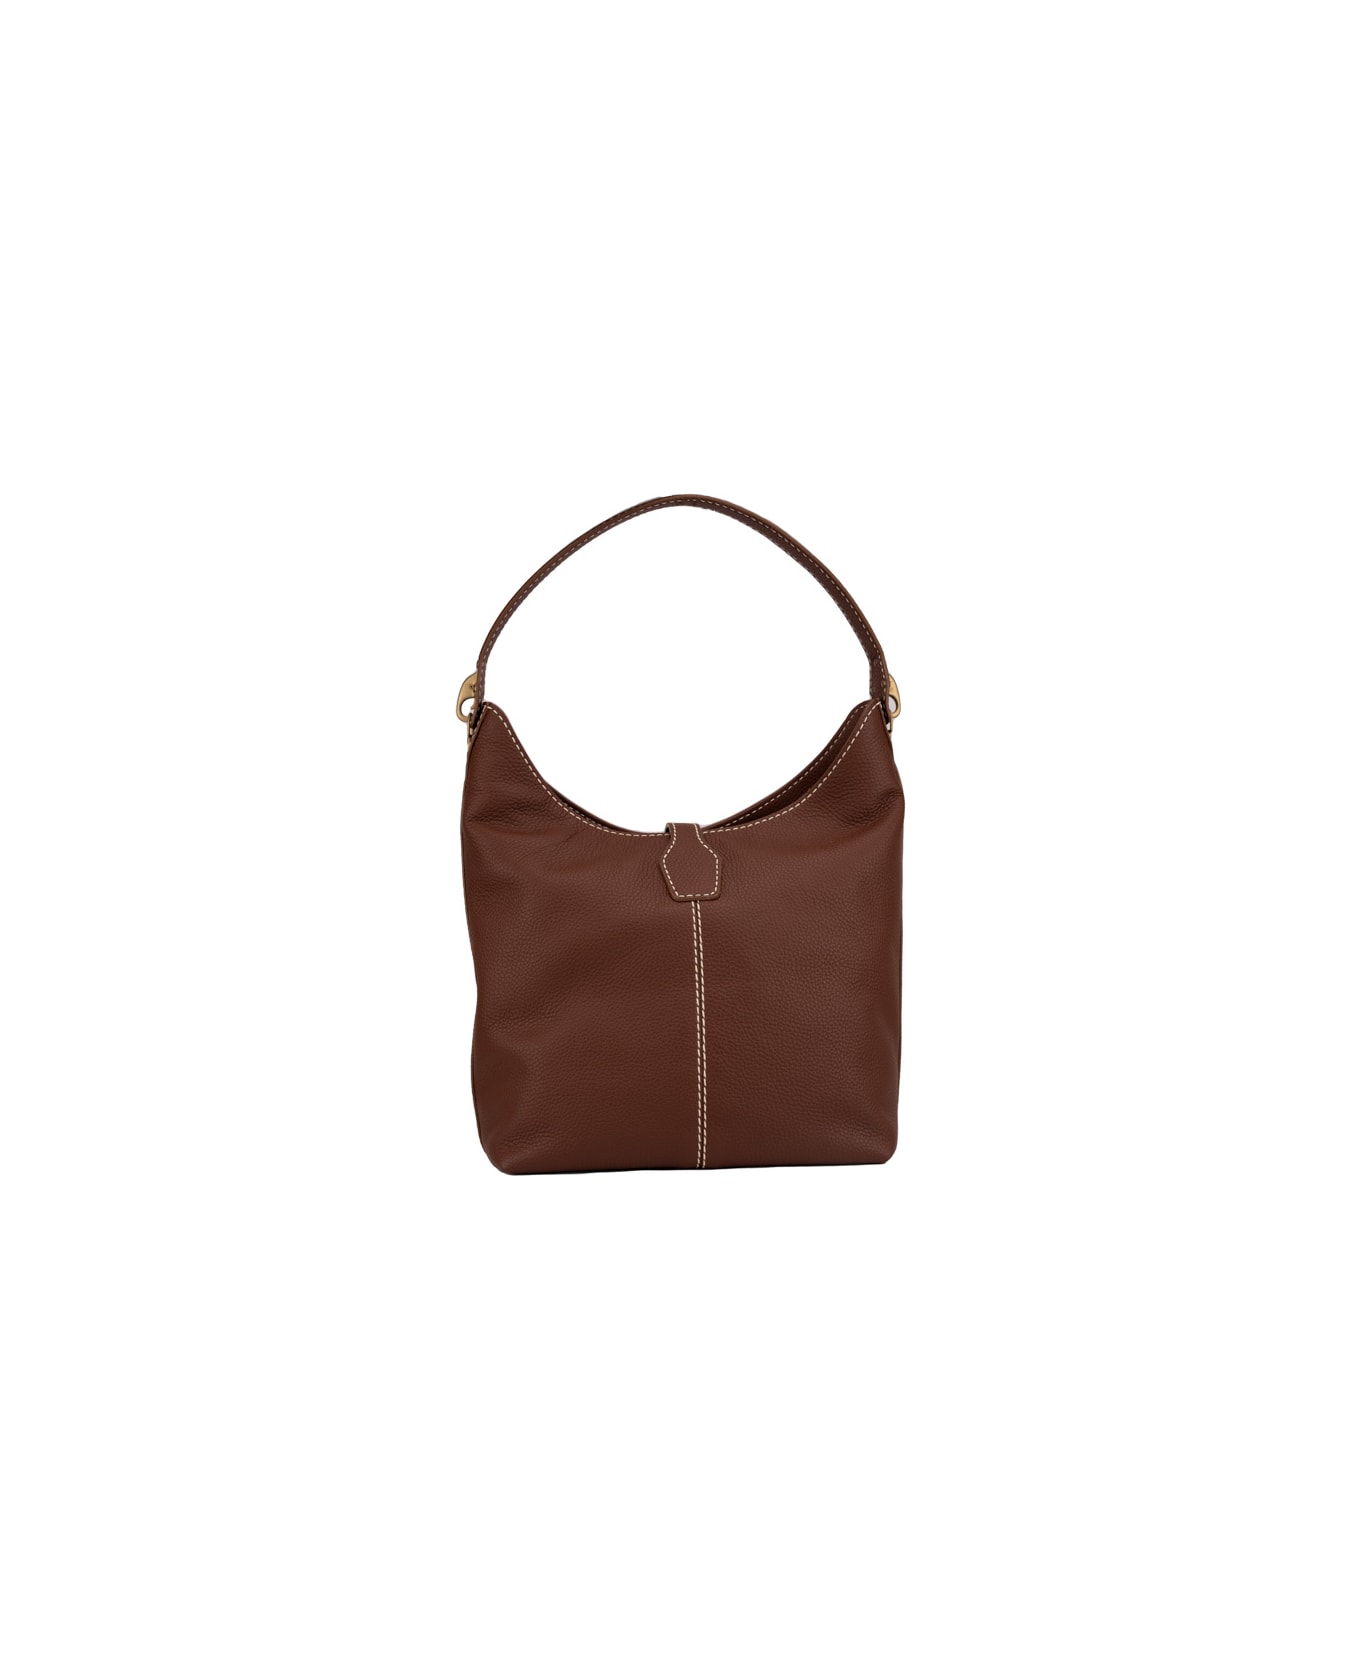 Fay Hobo Bag In Leather - Marrone scuro